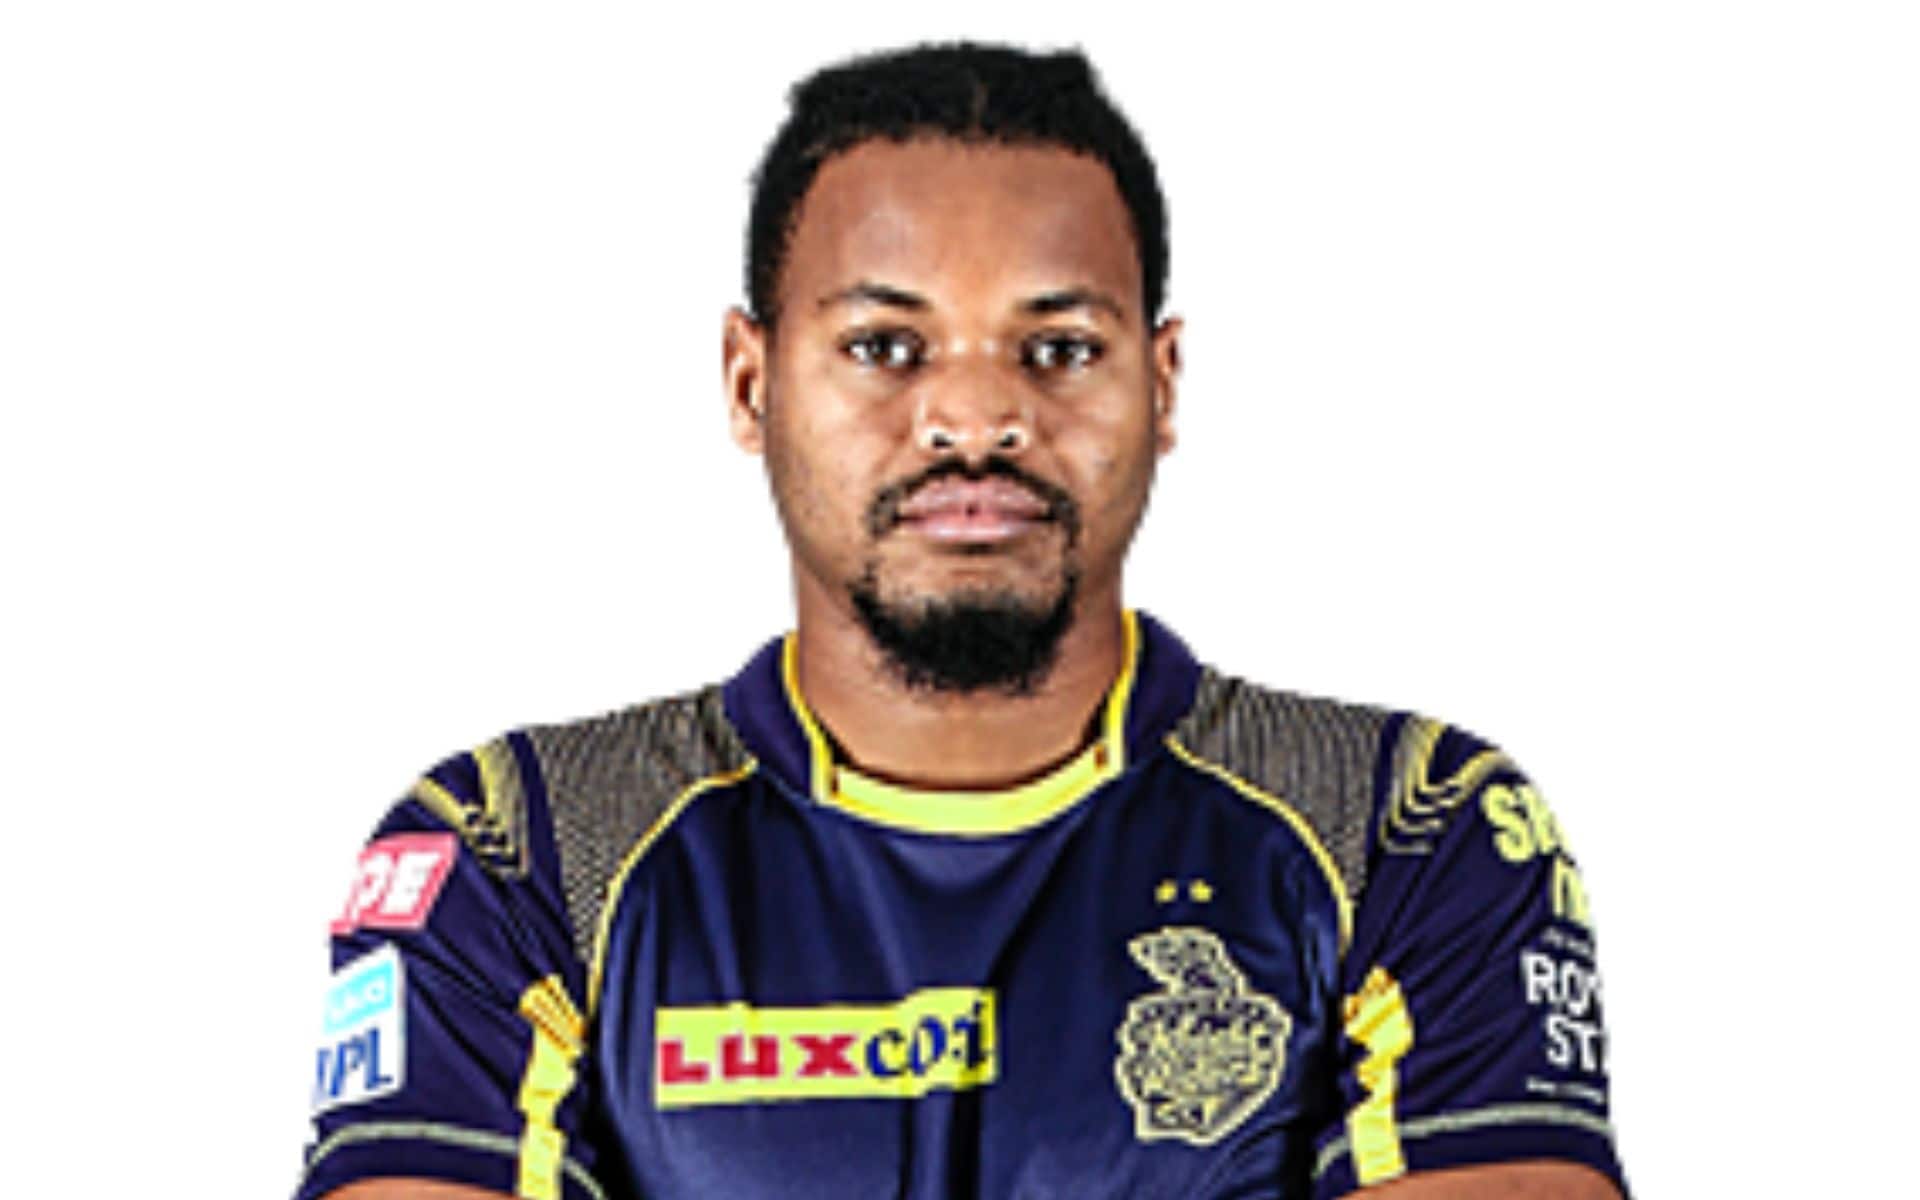 Javon Searles played for KKR in 2018 (x.com)